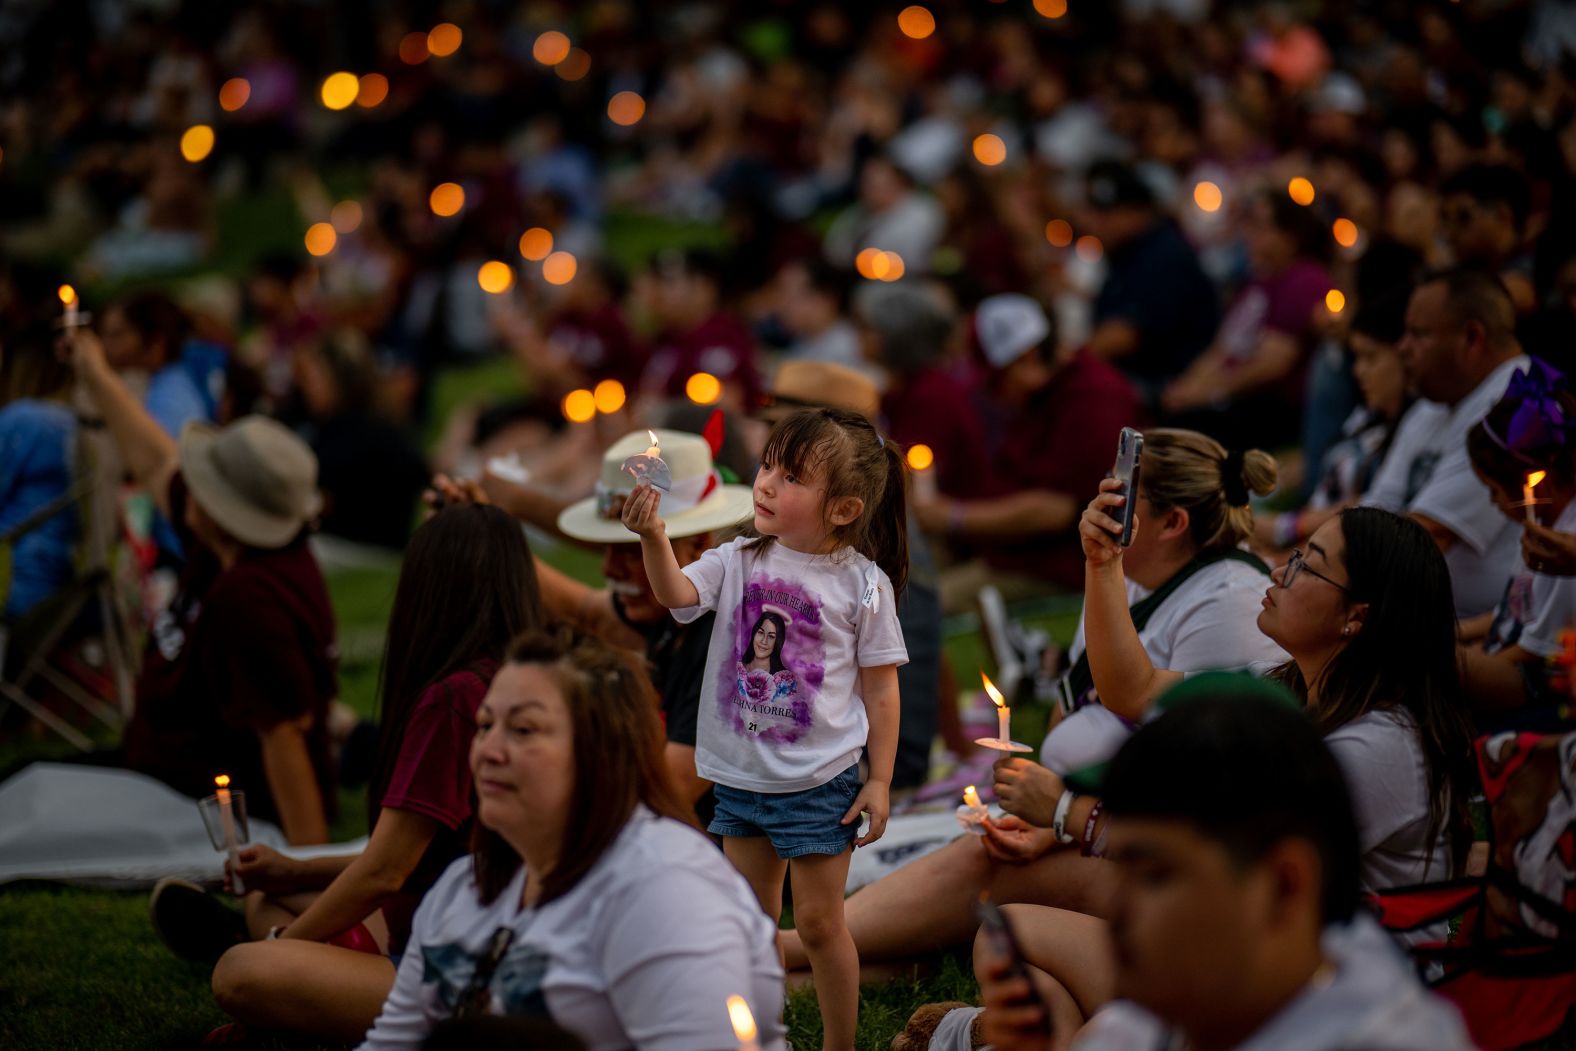 Families in Uvalde, Texas, participate in a candlelight vigil on Wednesday, May 24, to remember the <a href="index.php?page=&url=https%3A%2F%2Fwww.cnn.com%2Finteractive%2F2023%2F05%2Fus%2Fvictims-uvalde-school-shooting%2F" target="_blank">19 children and two adults</a> who were killed during a mass shooting last year at Robb Elementary School.